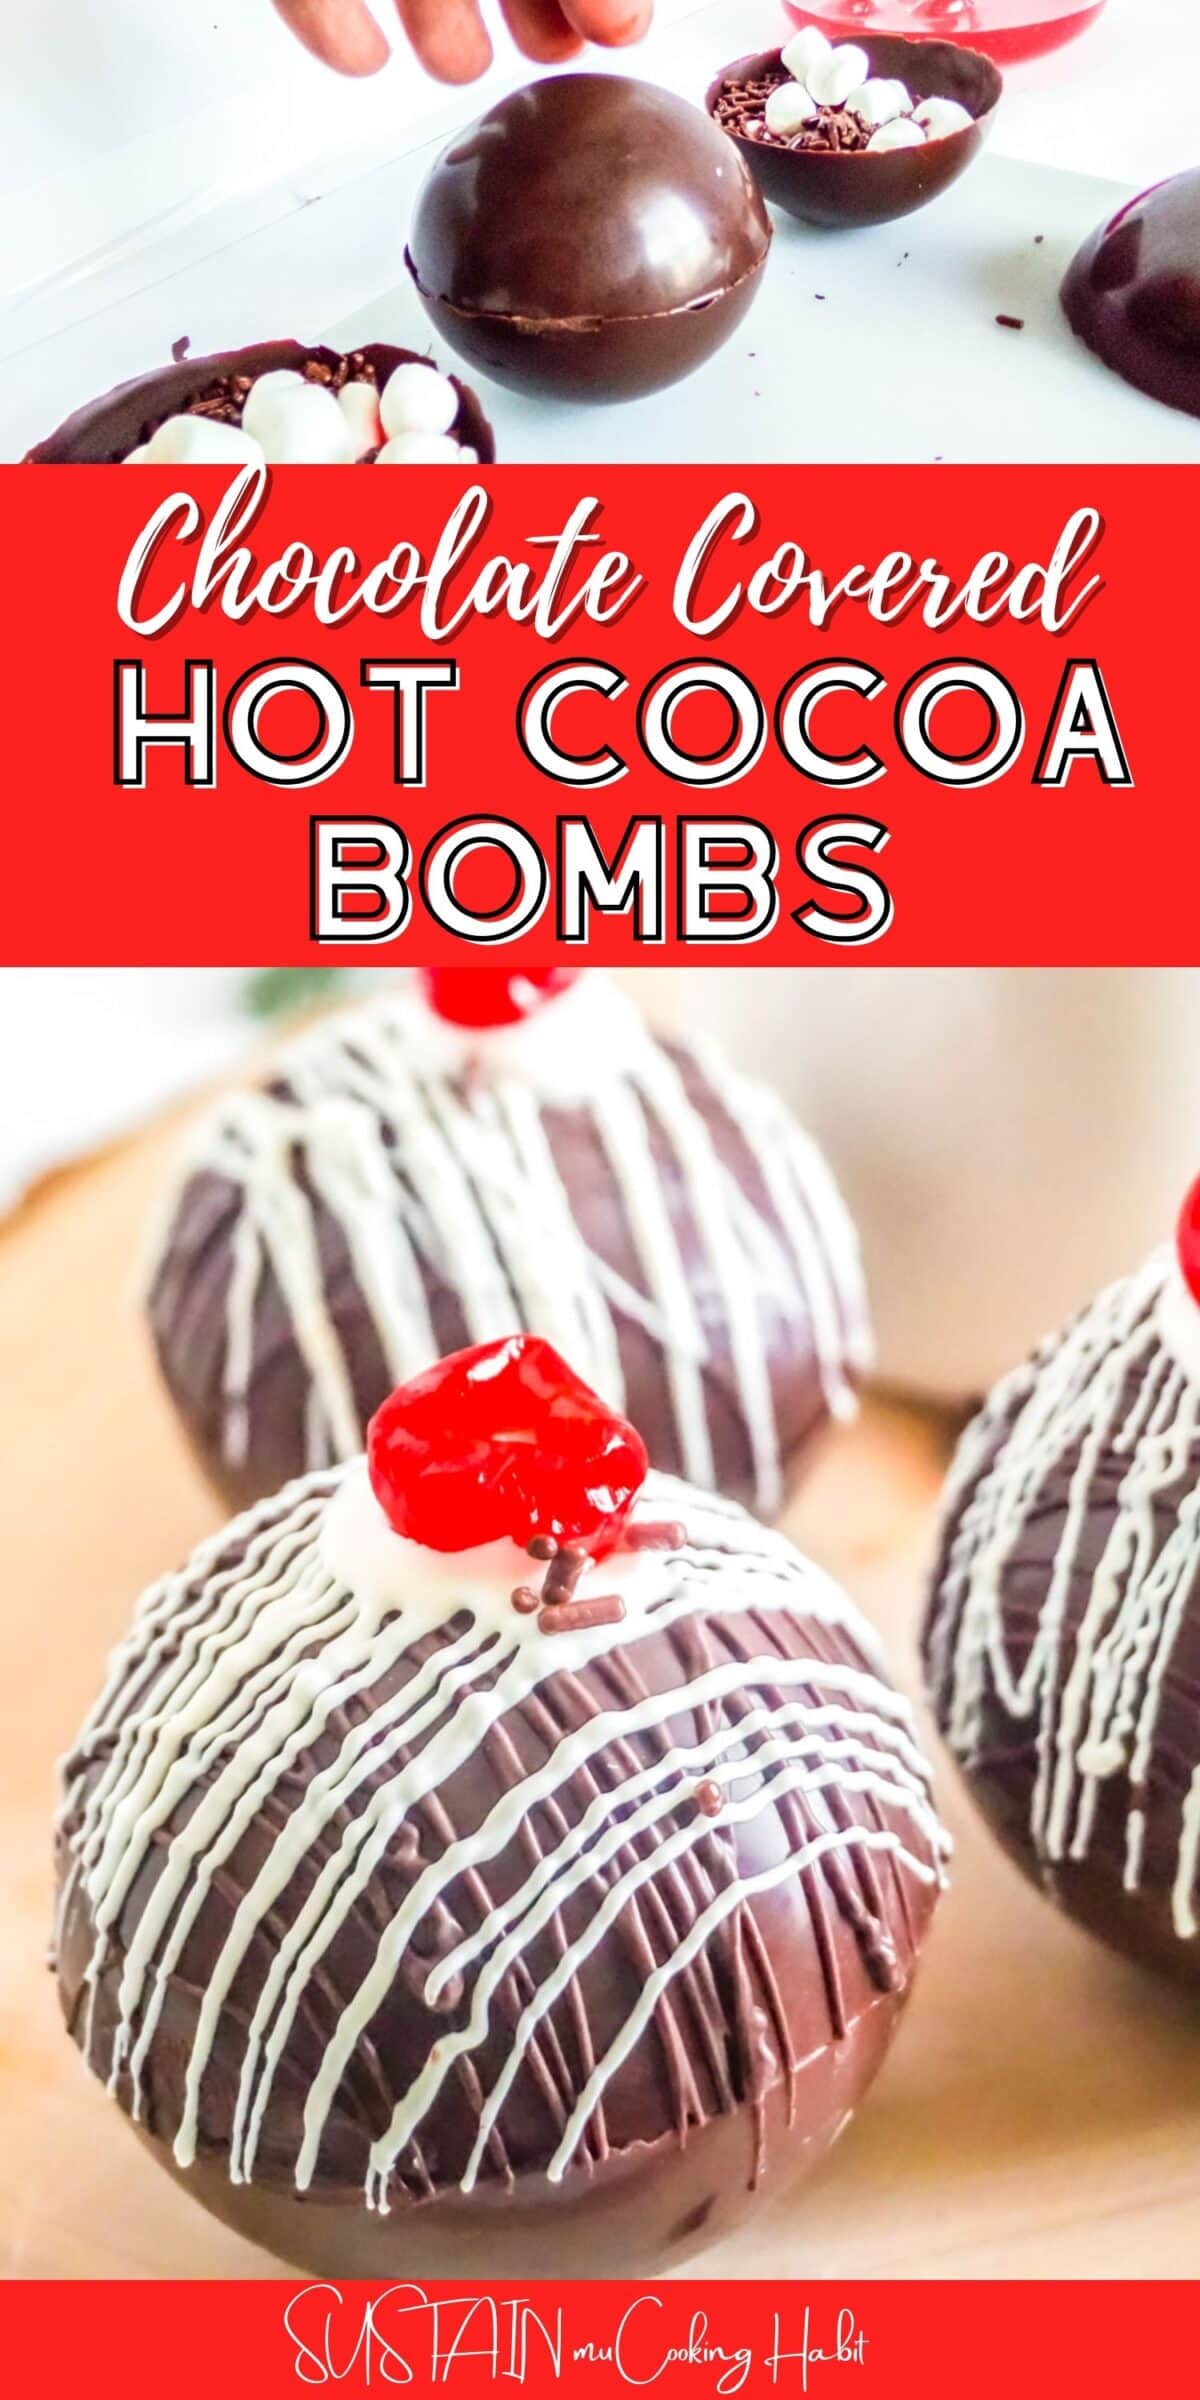 Collage showing to make chocolate covered cherry hot cocoa bombs with text overlay.